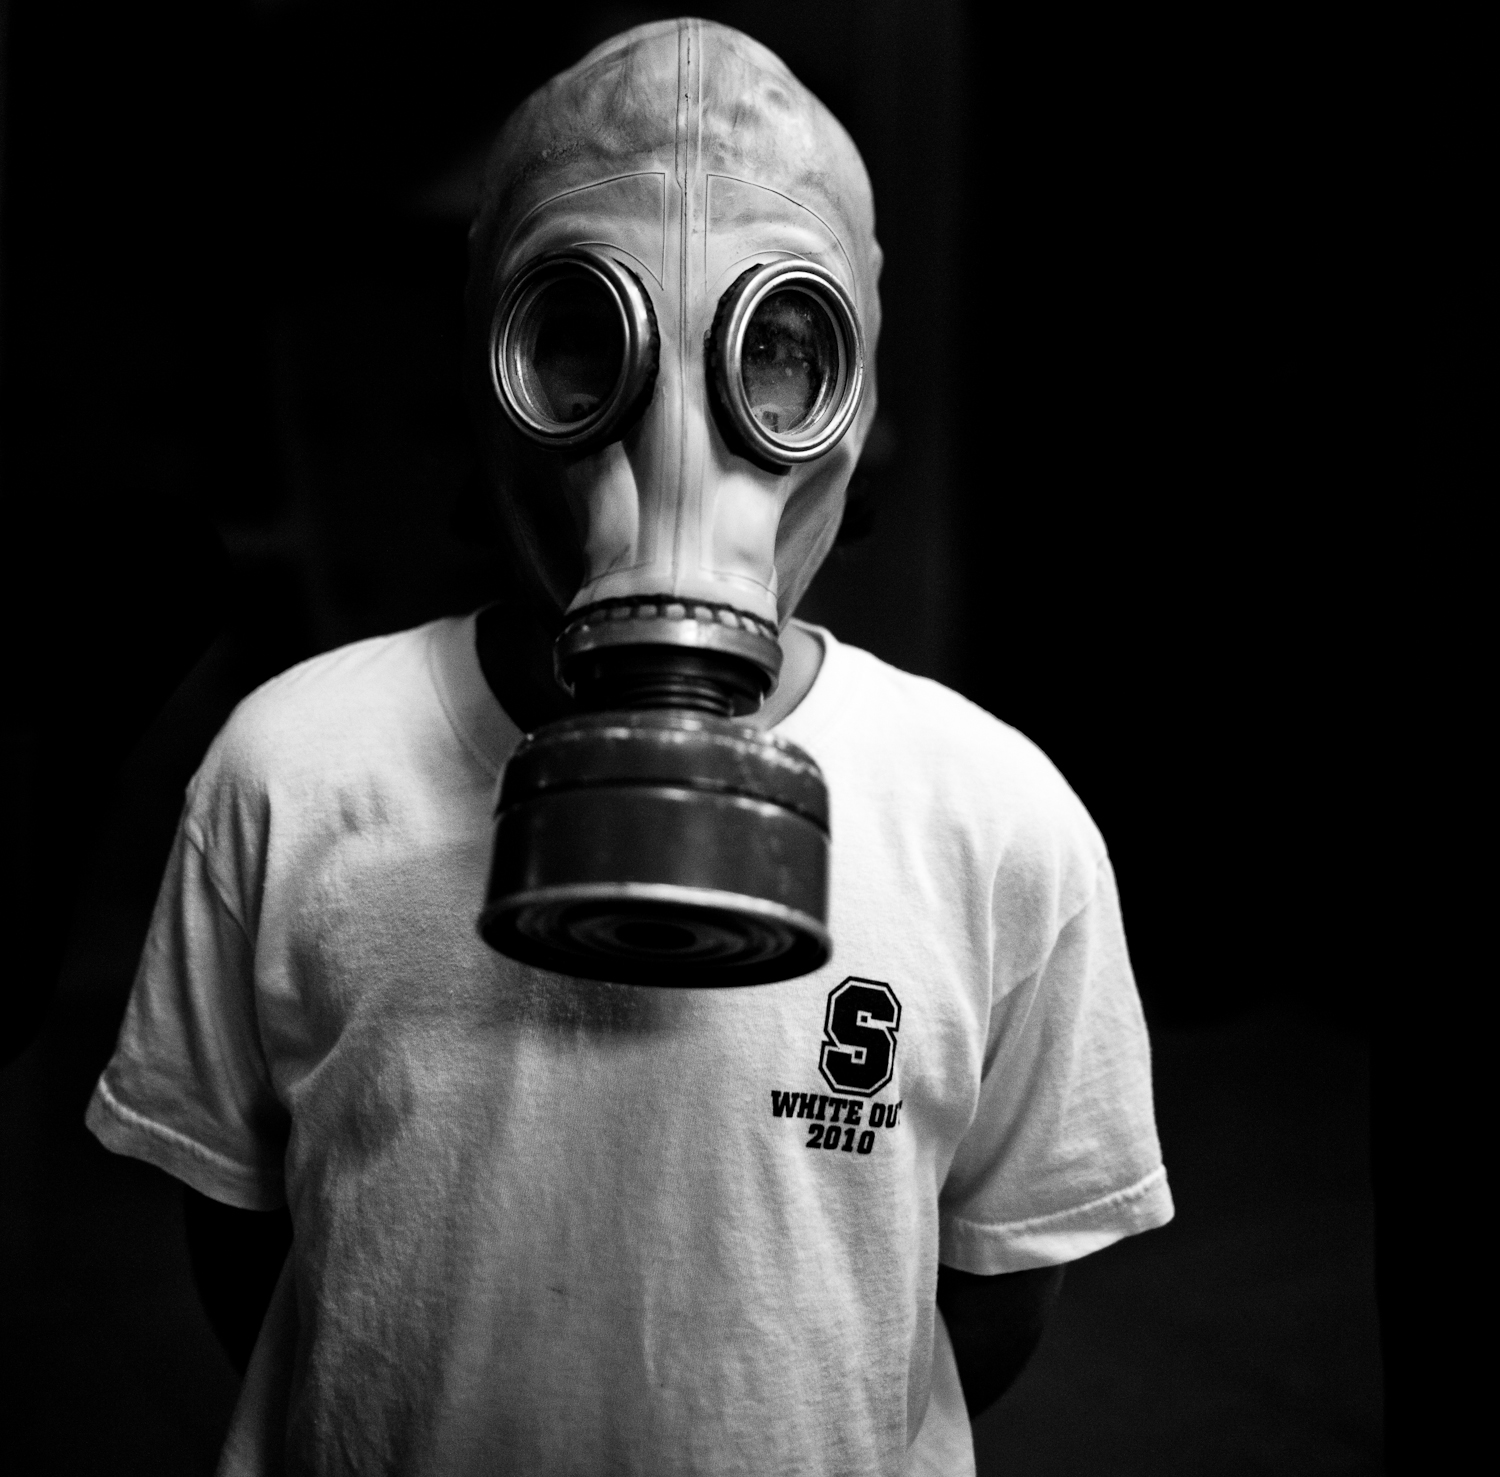 man wearing a gas mask stands against a black background